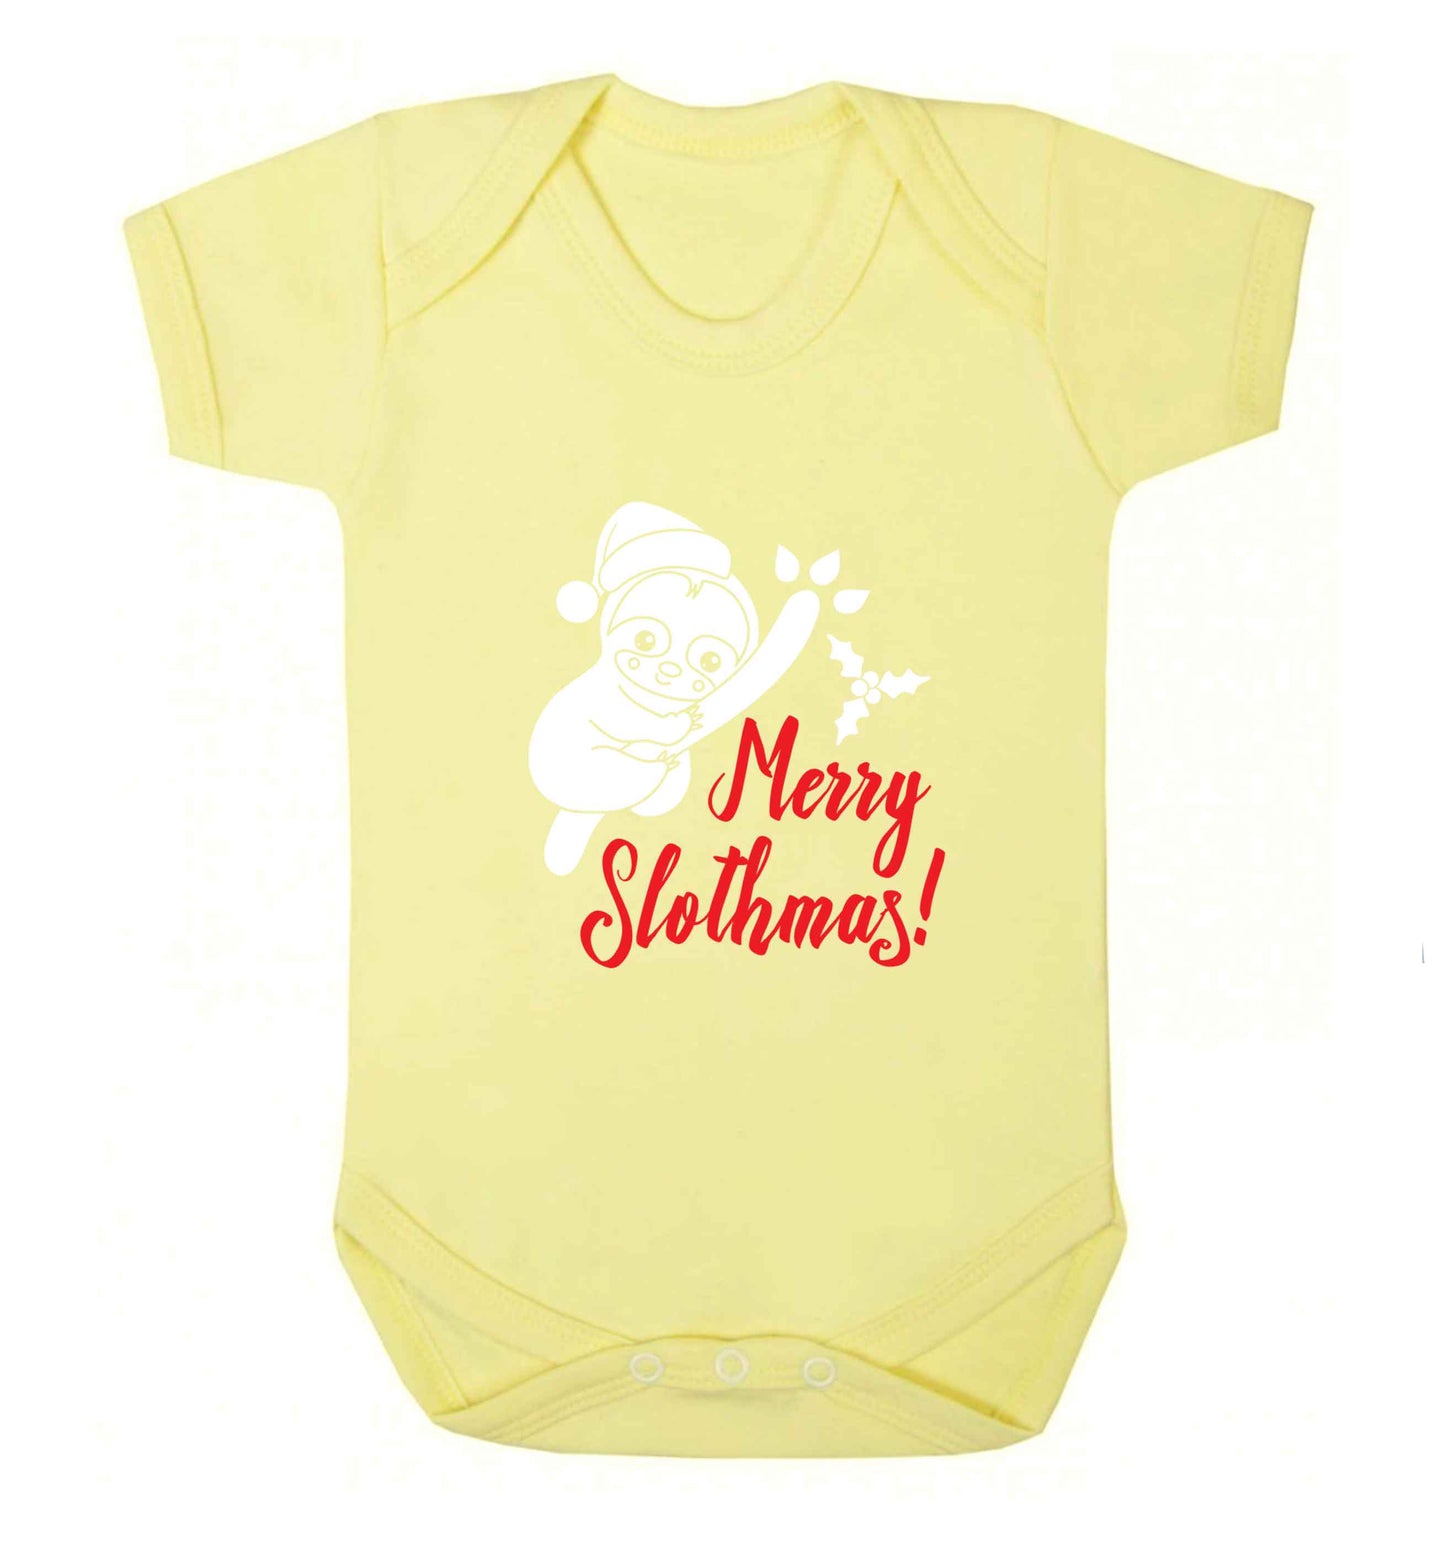 Merry Slothmas baby vest pale yellow 18-24 months